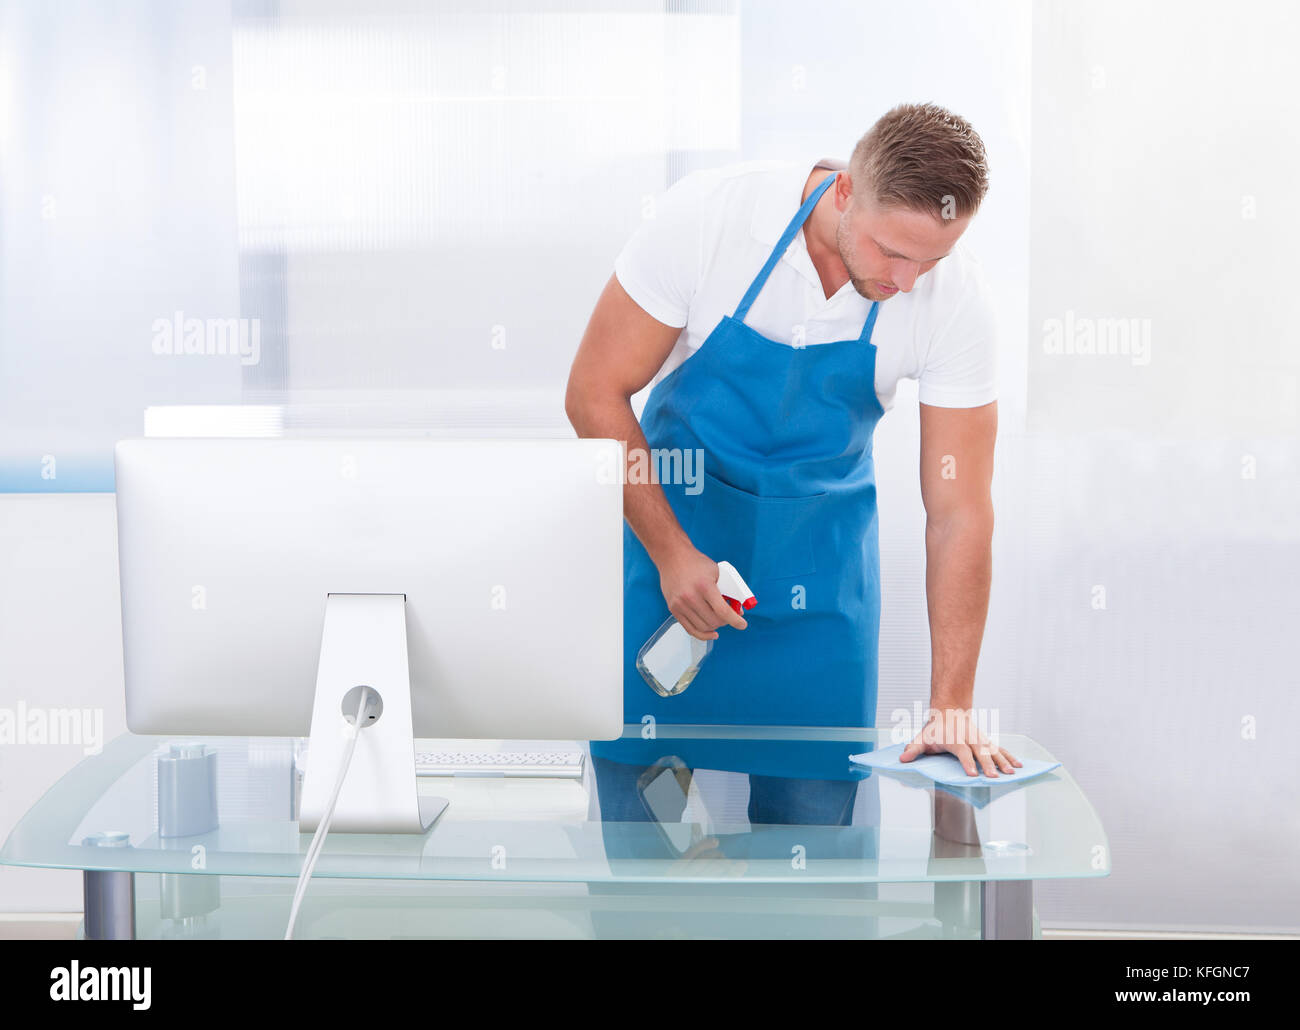 Handsome young janitor or cleaner cleaning an office spraying the top of the desk with disinfectant before the office workers start their day Stock Photo